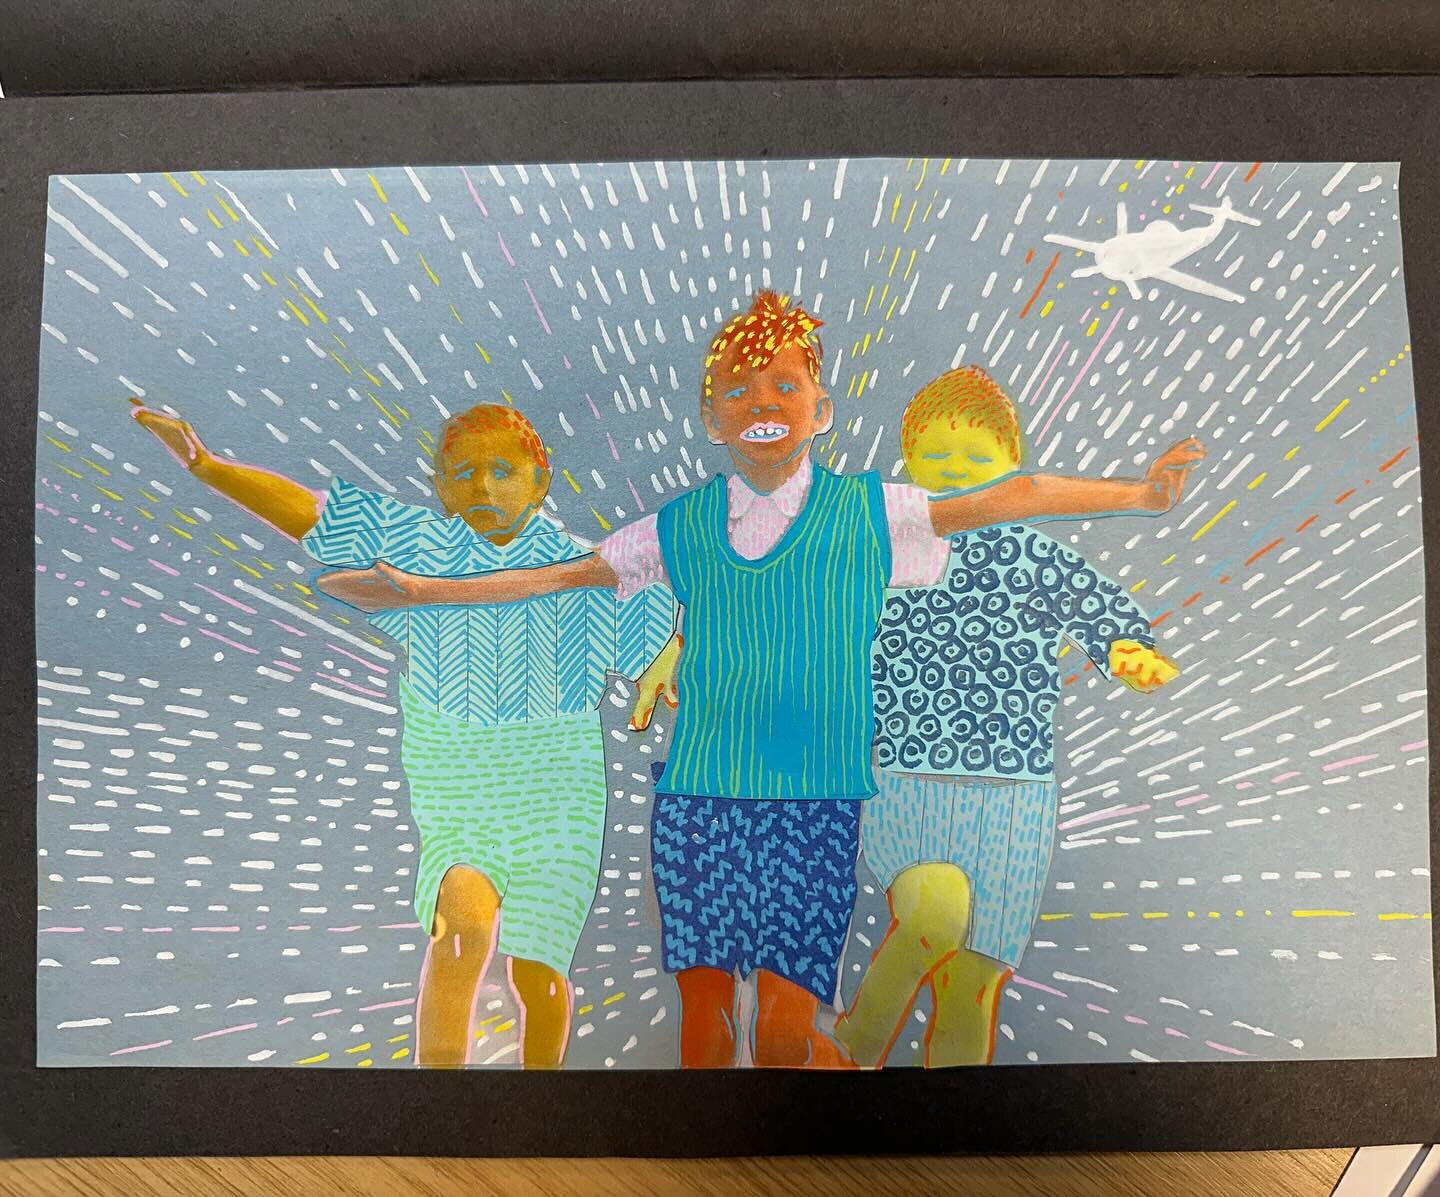 We have been observing the Holocaust memorial week by combining images from the film/book &ldquo;boy in the blue striped pyjamas&rdquo; with the artist Naomi Vona. We send our thoughts and support to all those affected by the Holocaust. Peace and lov